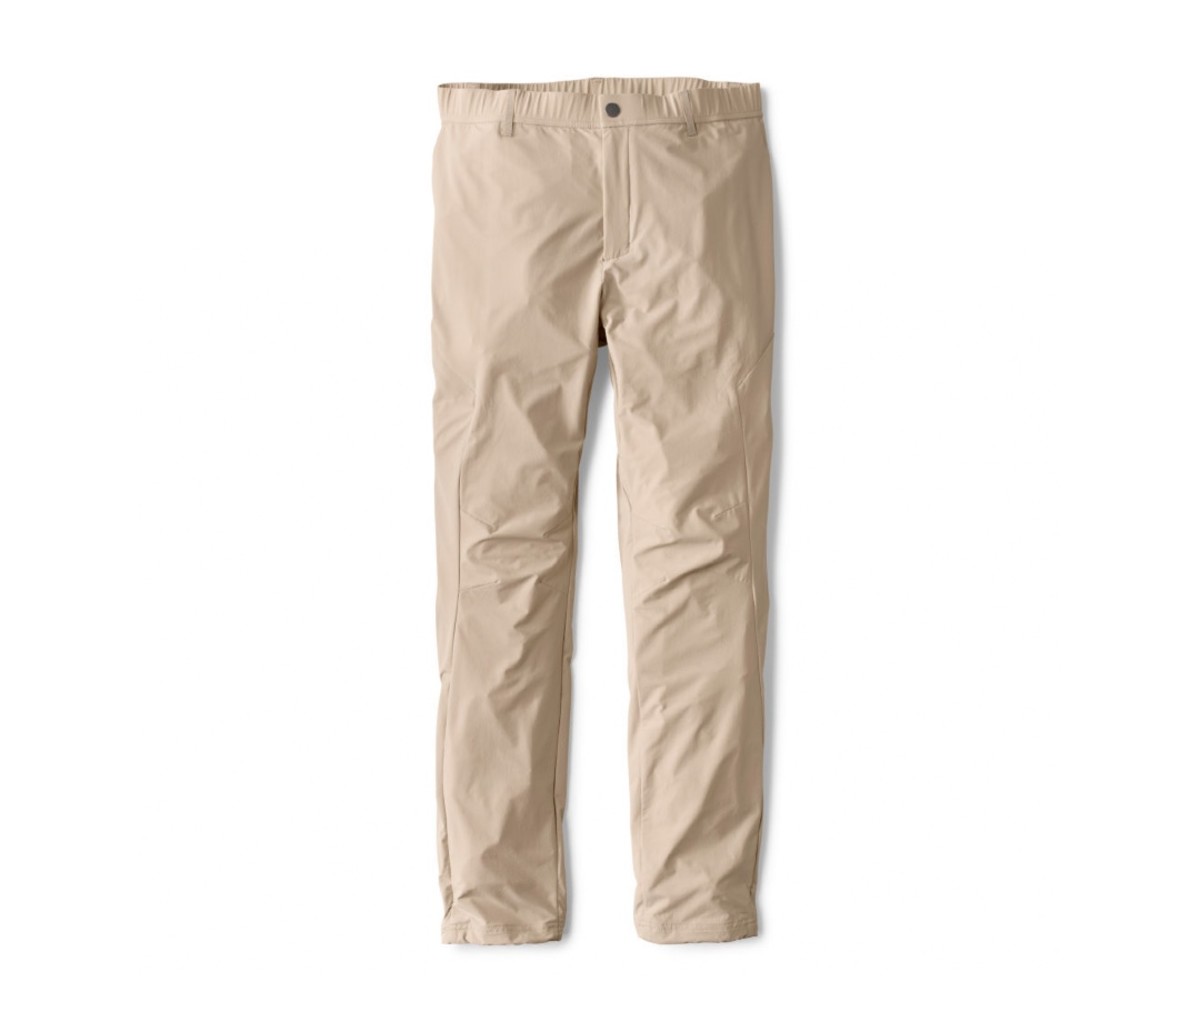 Pull on long pants with UPF protection like the Orvis Pro Sun Skiff Pants to survive sunny days on the water.